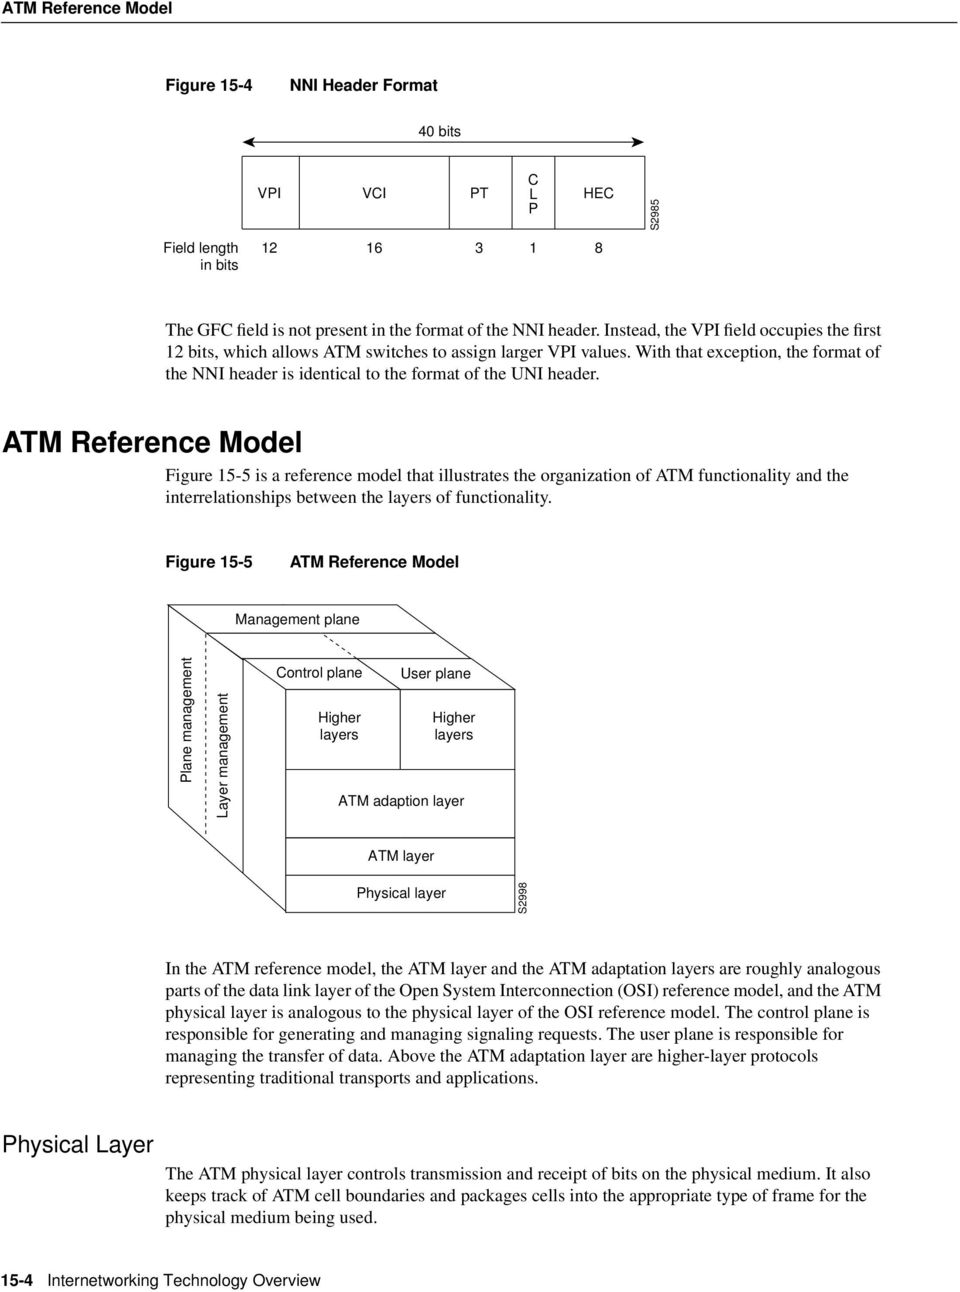 Model Figure 15-5 is a reference model that illustrates the organization of ATM functionality and the interrelationships between the layers of functionality Figure 15-5 ATM Reference Model Management